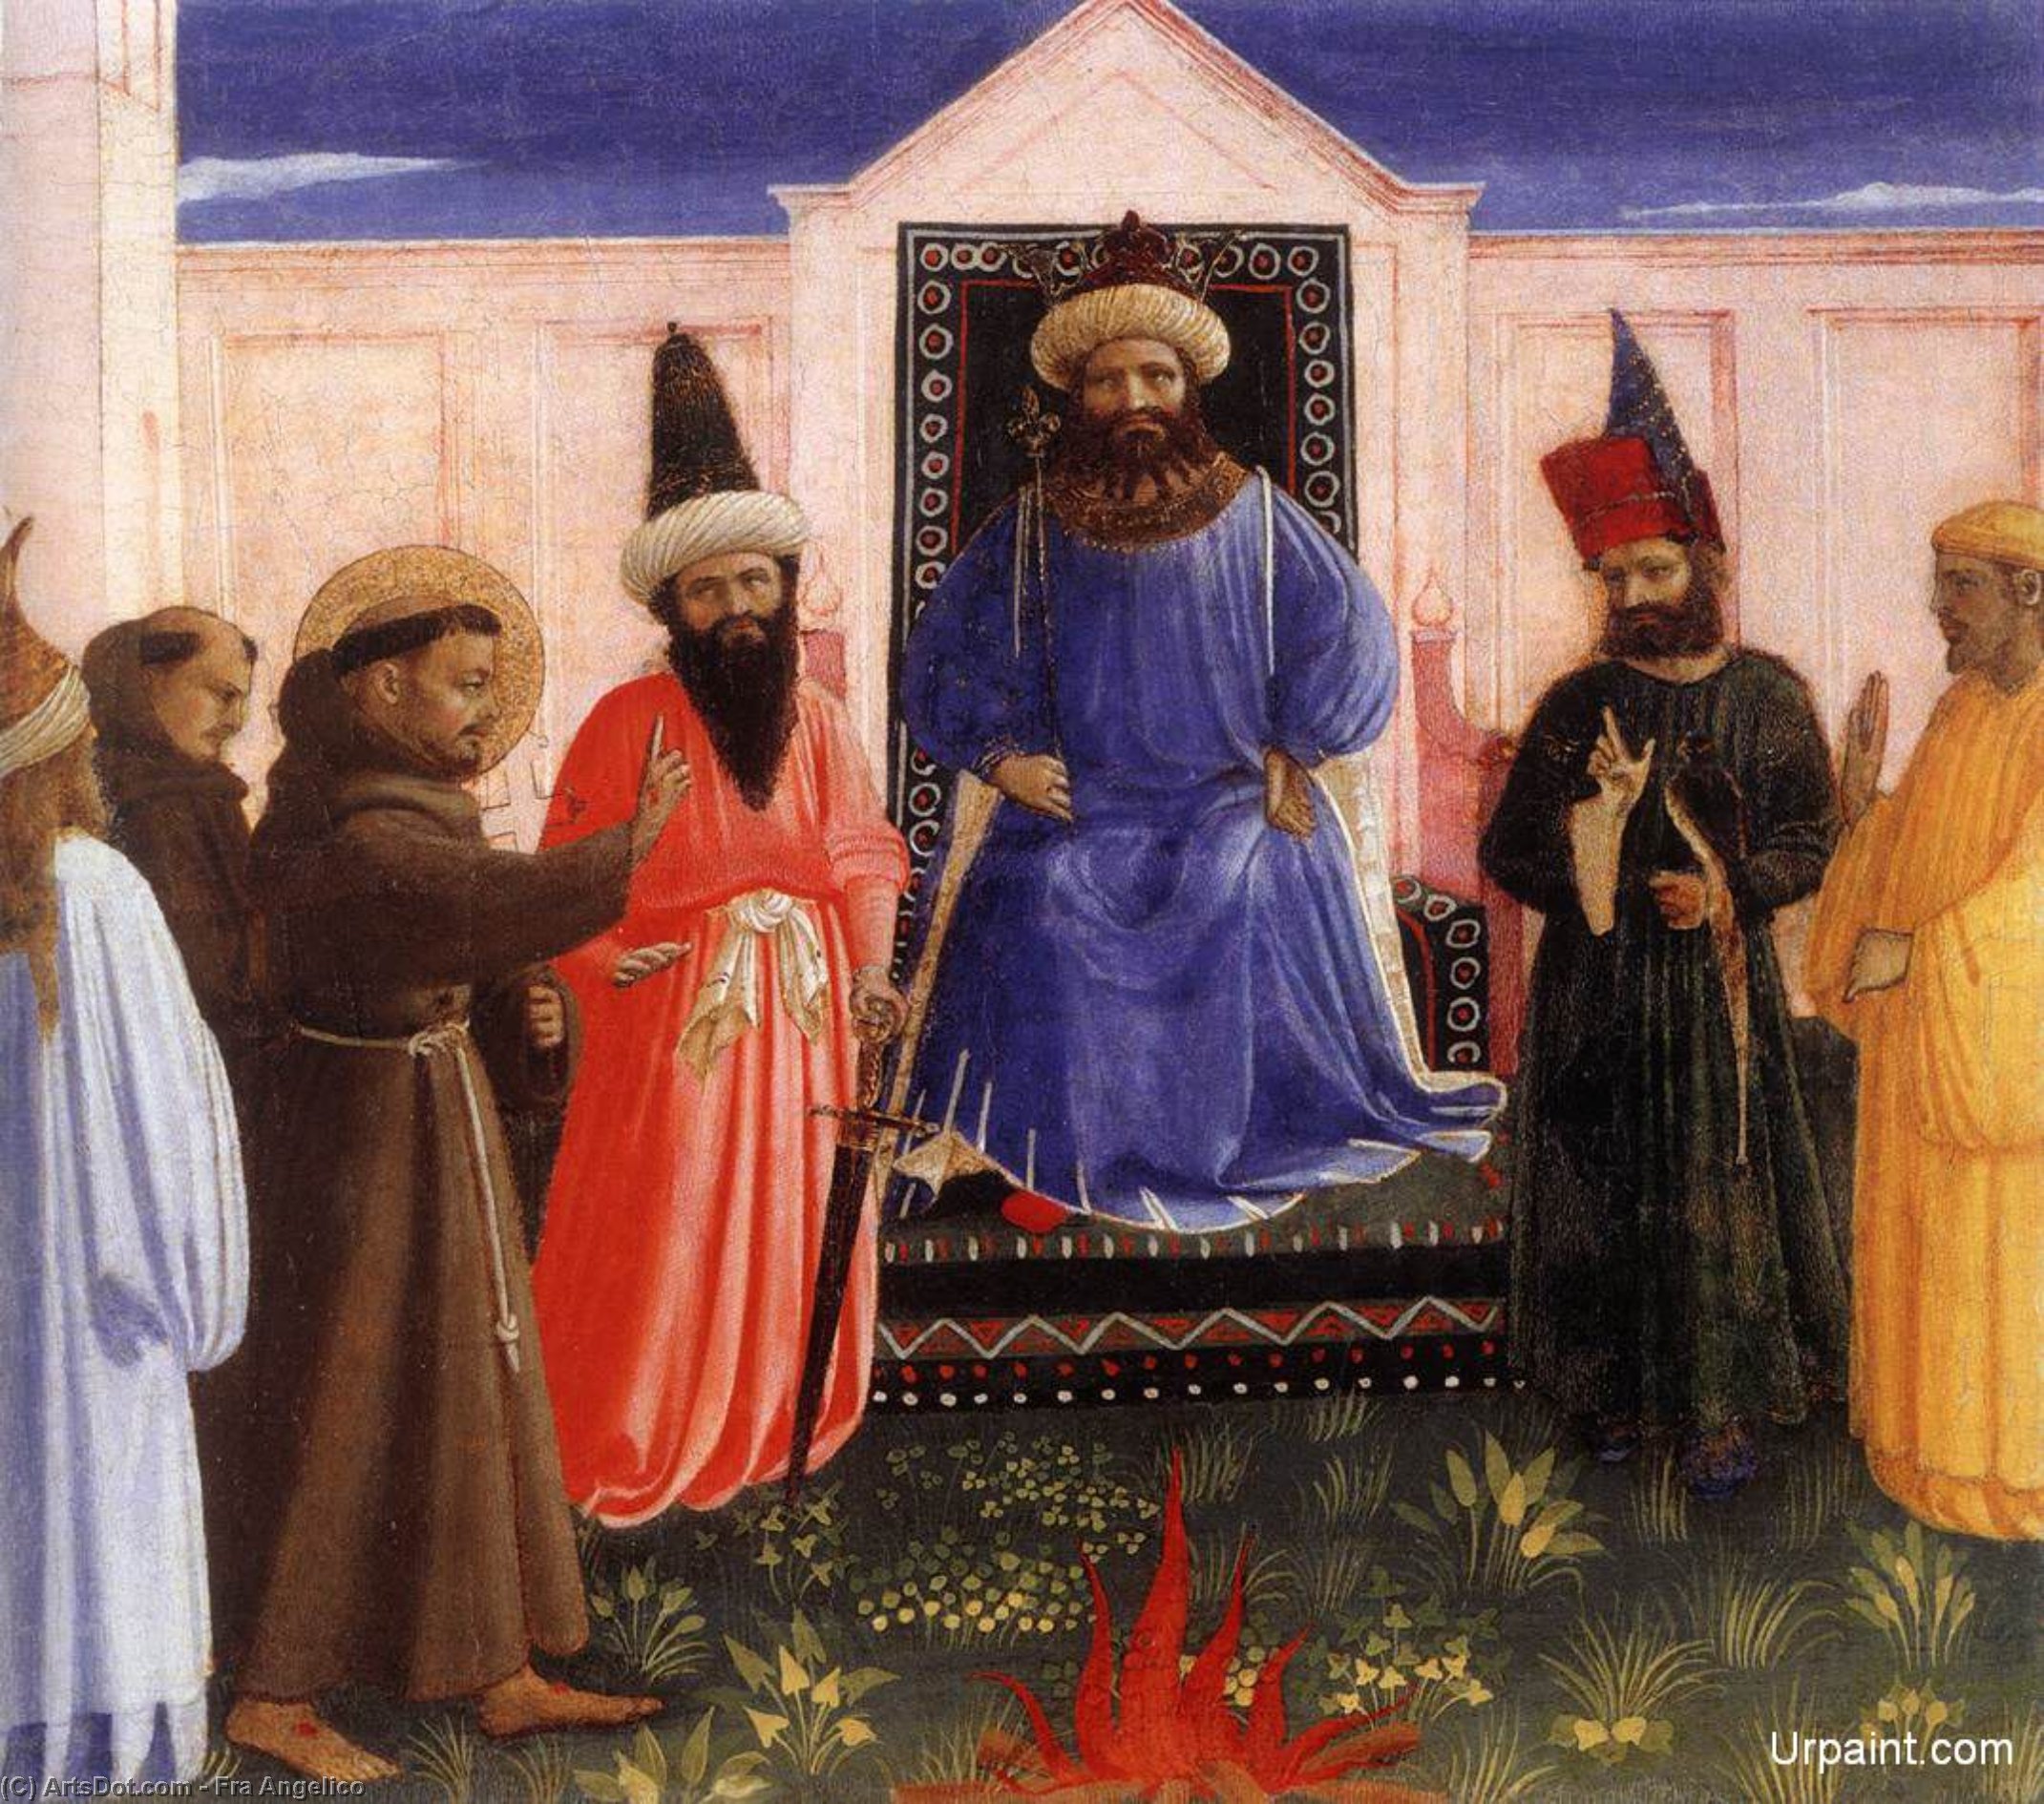 WikiOO.org - 백과 사전 - 회화, 삽화 Fra Angelico - The Trial by Fire of St. Francis before the Sultan